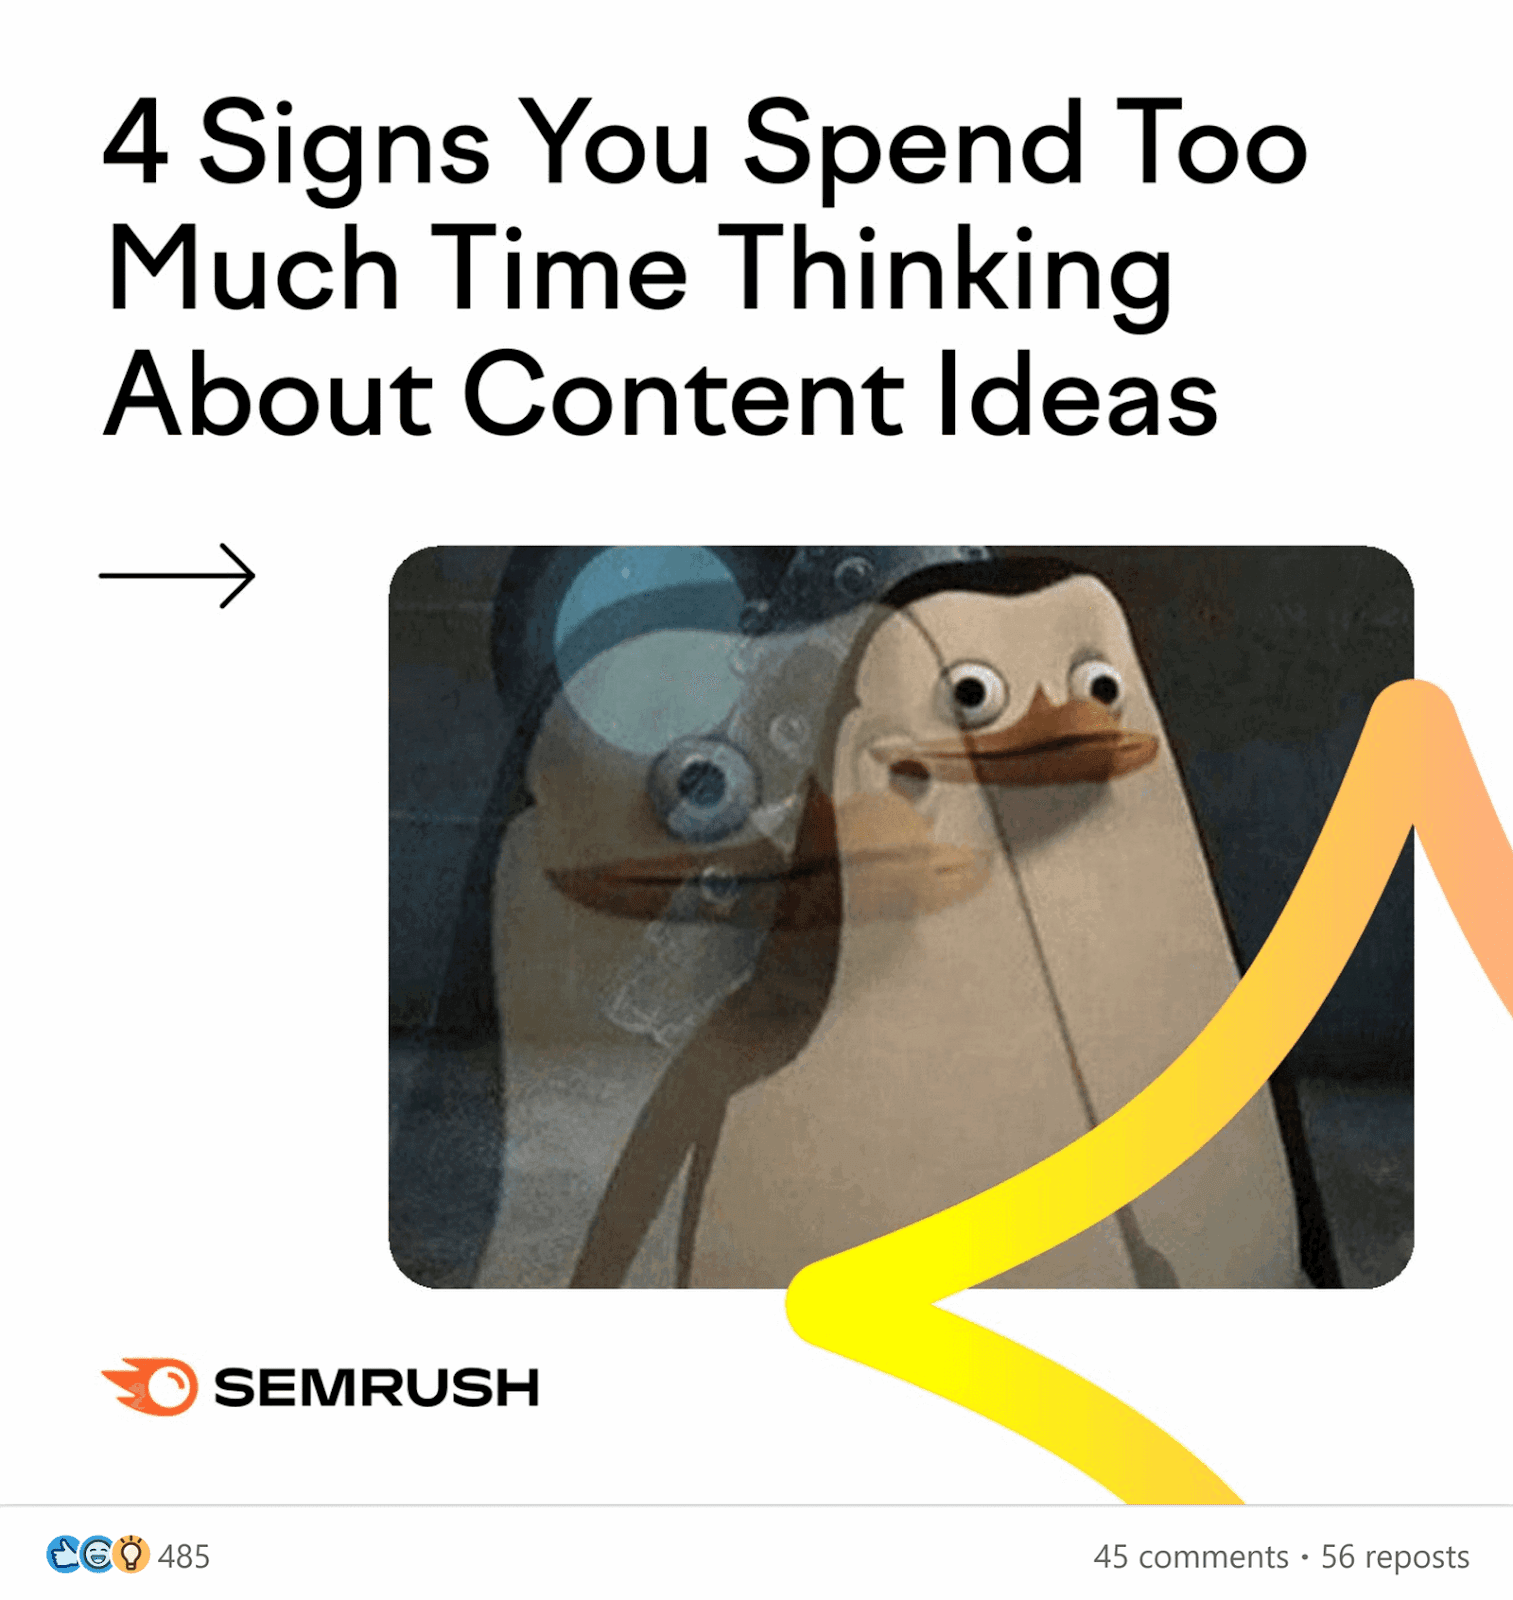 Semrush Linkedin post titled "4 signs you spend too much time thinking about content ideas"